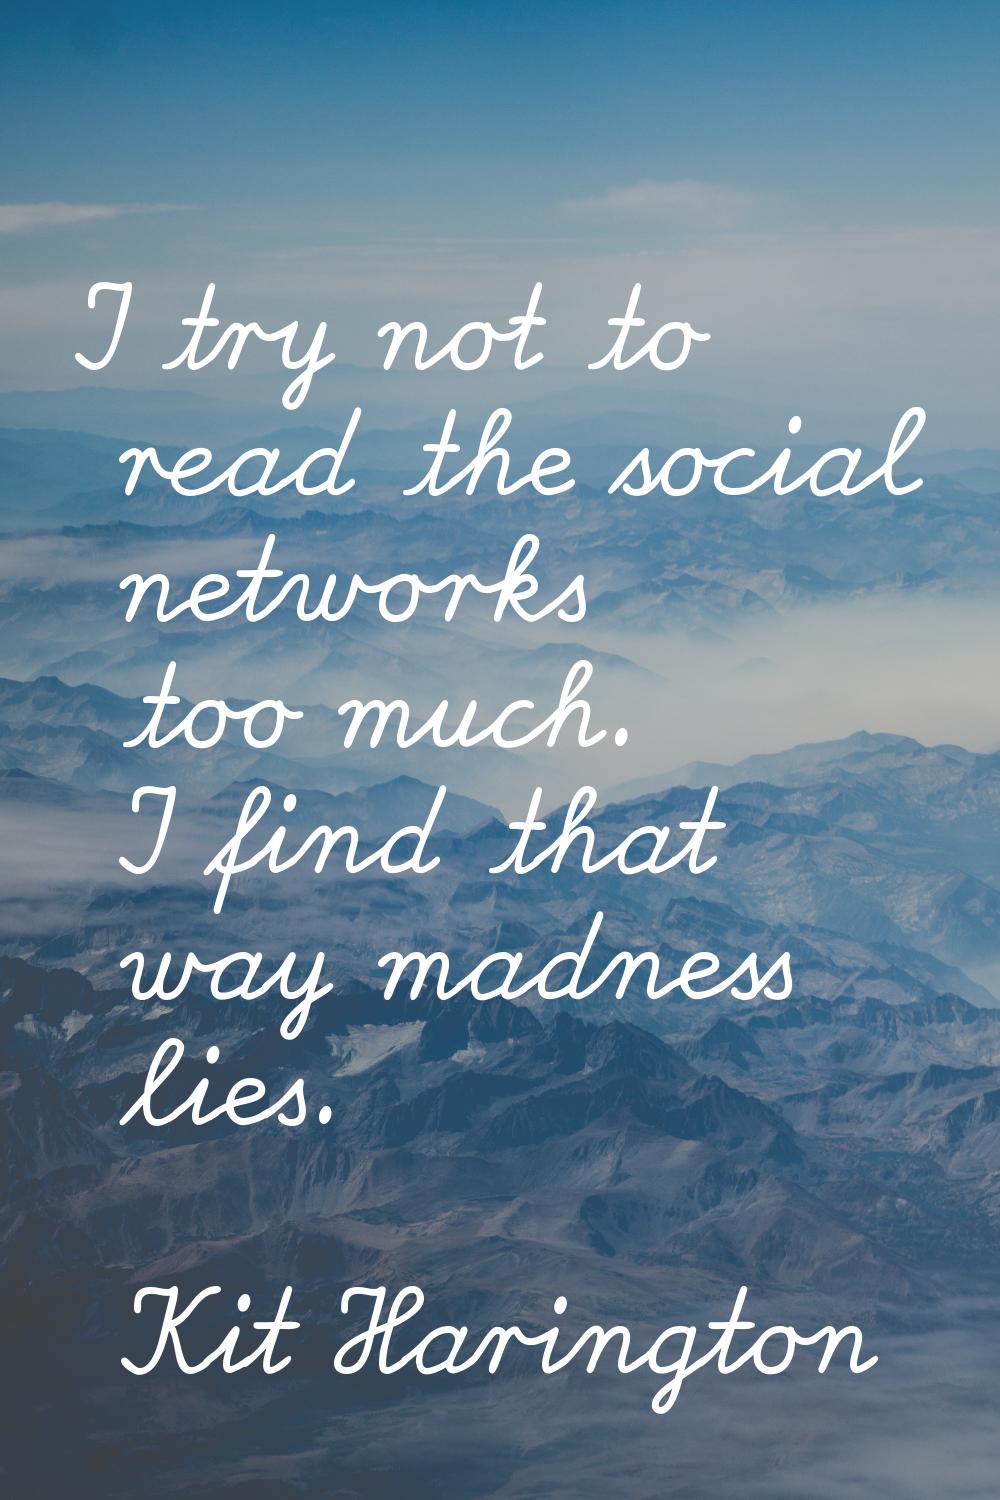 I try not to read the social networks too much. I find that way madness lies.